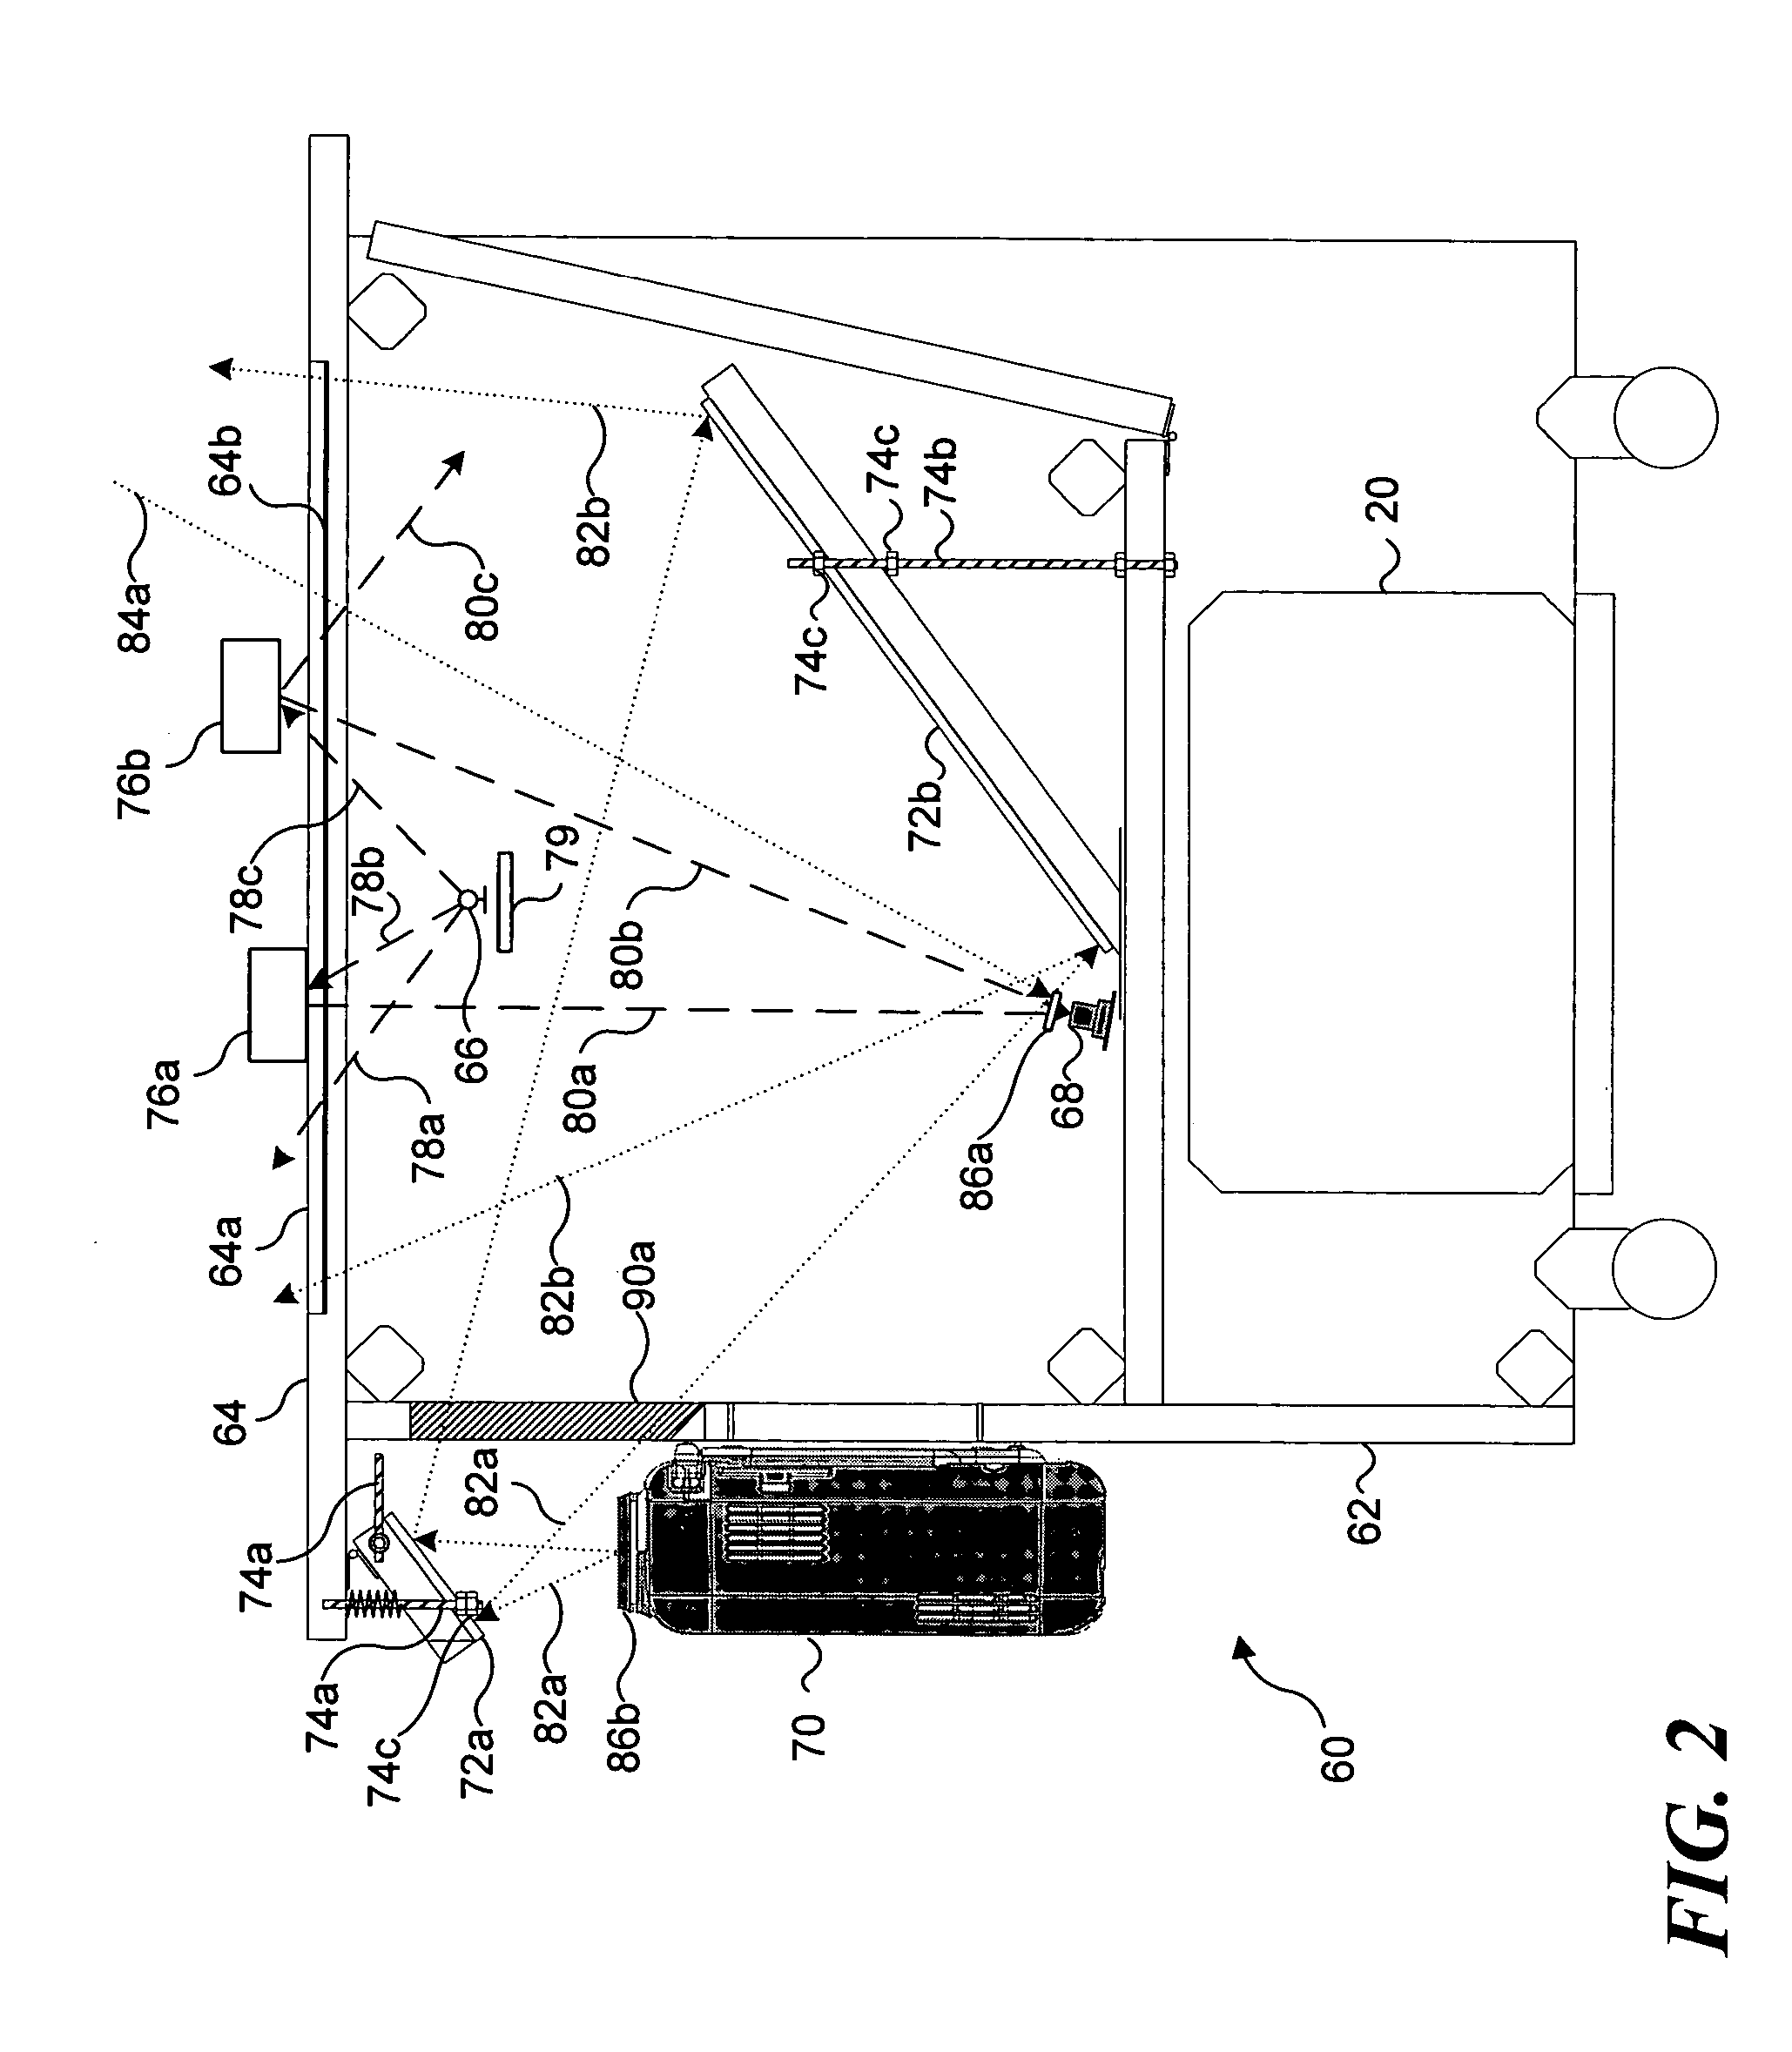 Method for controlling an intensity of an infrared source used to detect objects adjacent to an interactive display surface